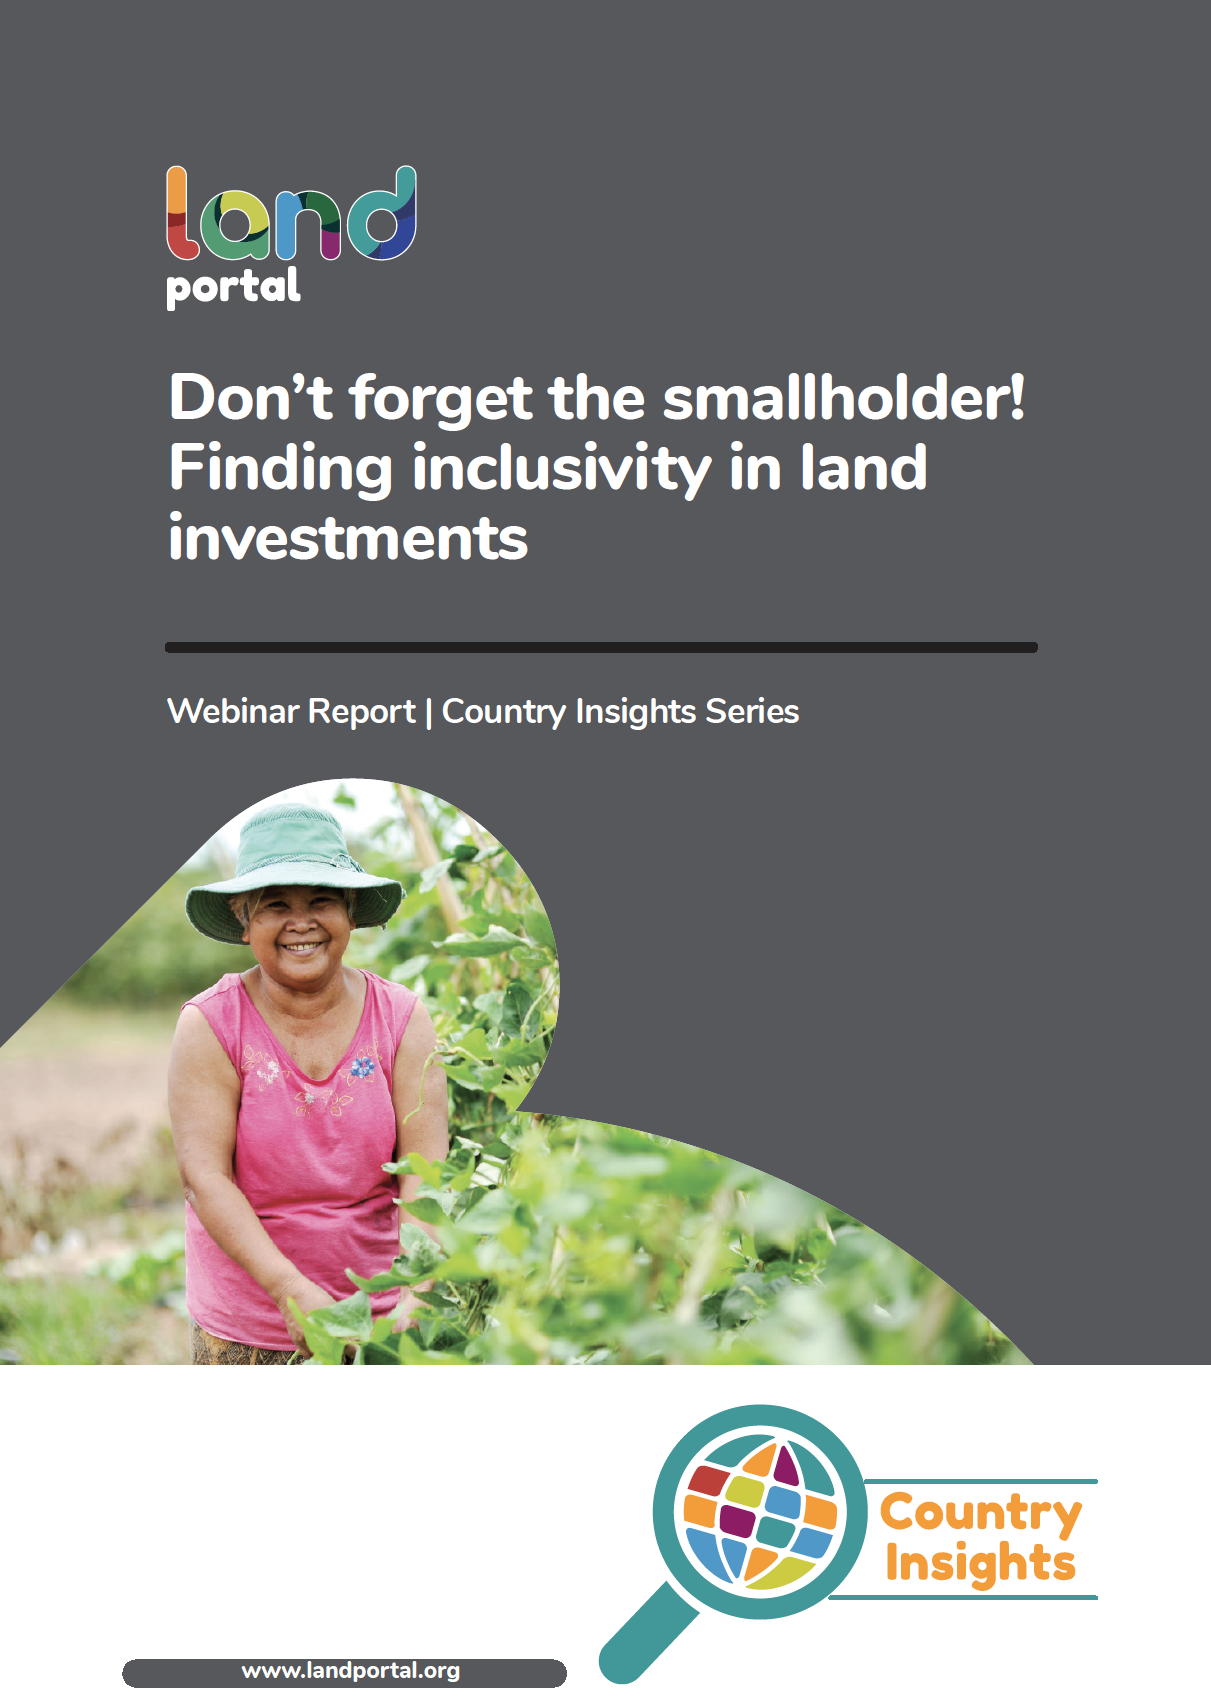 Don’t forget the smallholder! Finding inclusivity in land investments